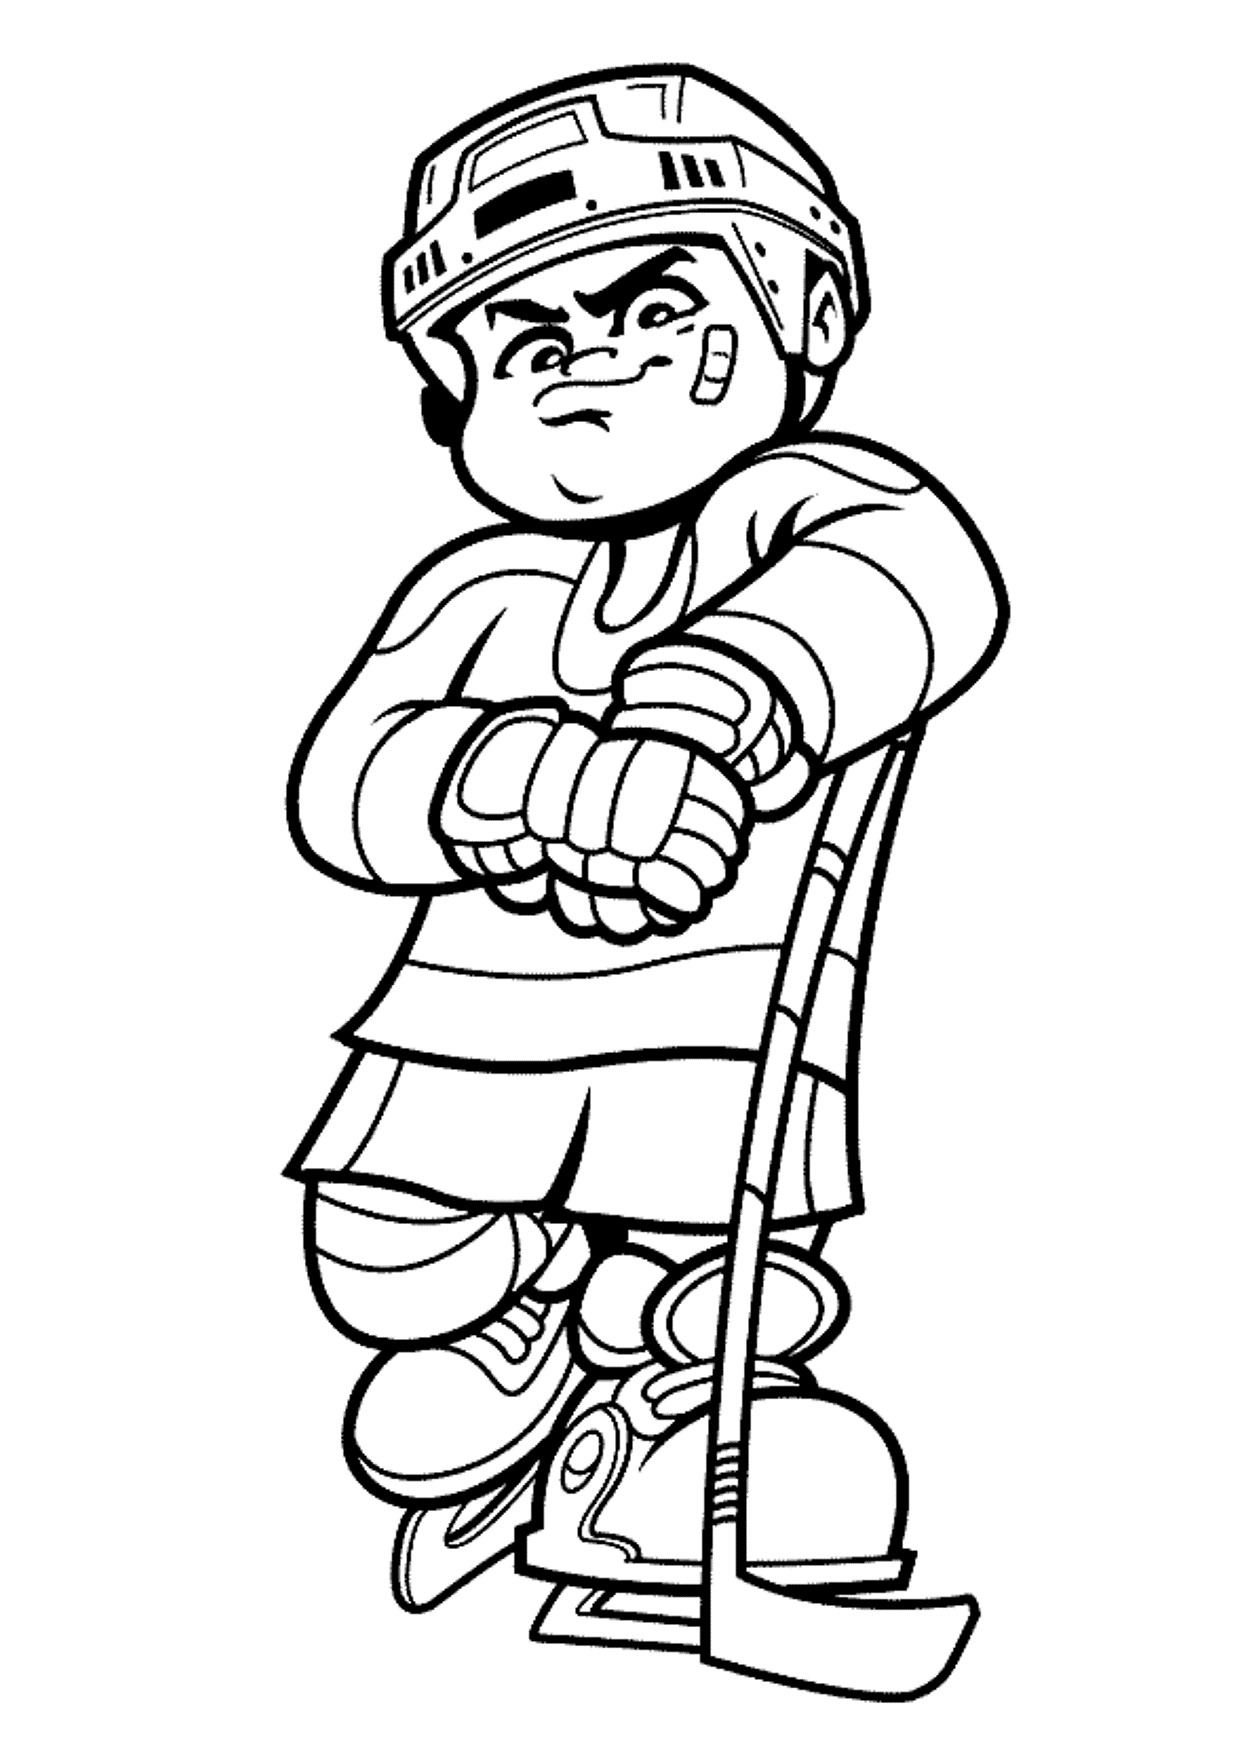 Coloring Pages For Boys Over 10
 Printable hockey coloring pages for kids ColoringStar